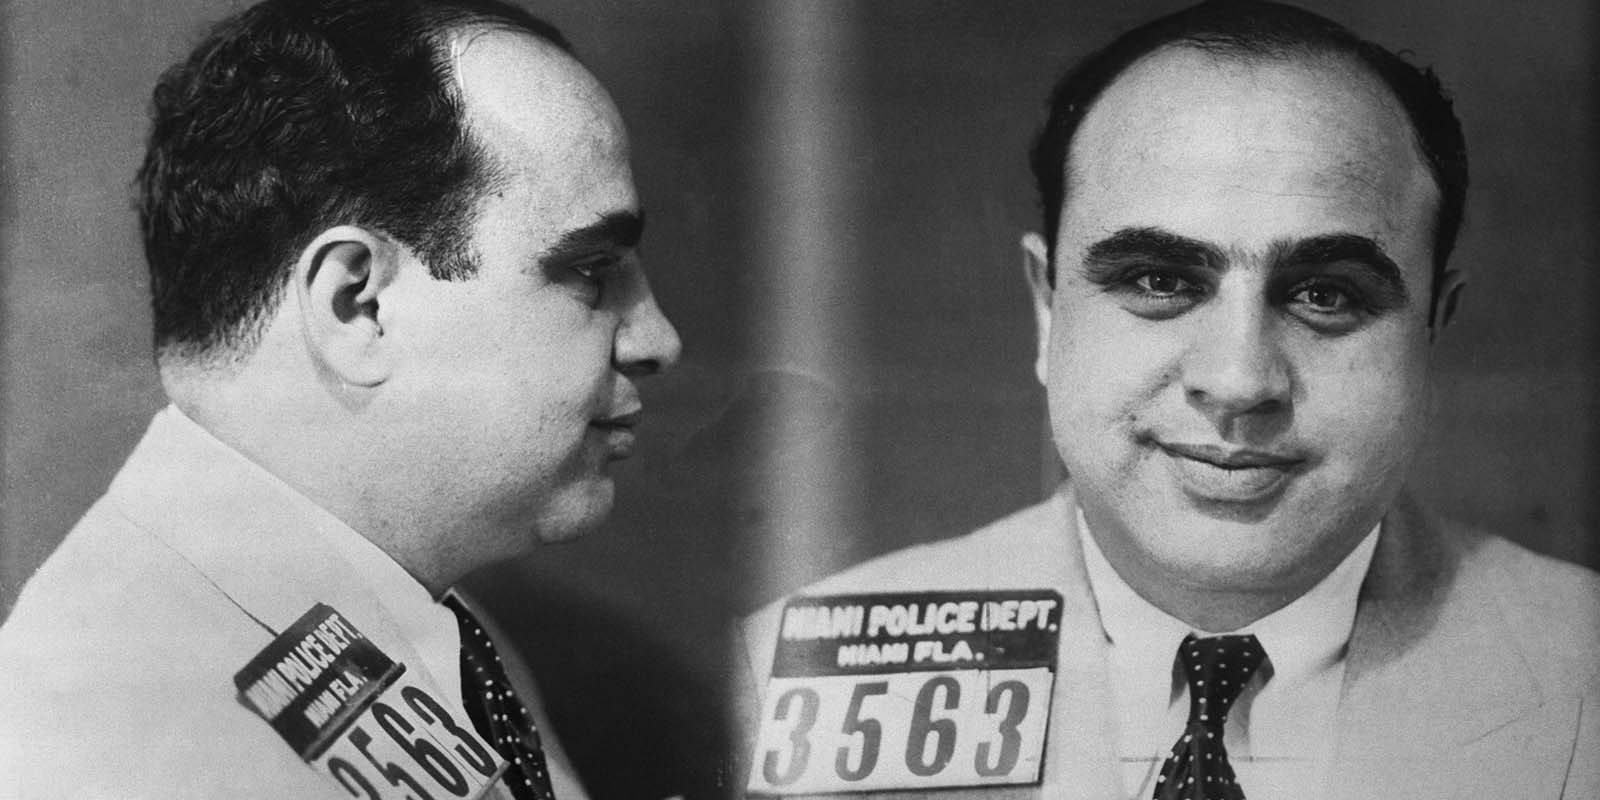 Police mug shot of Chicago mobster Al Capone, one of the leading gangsters of the prohibition era.